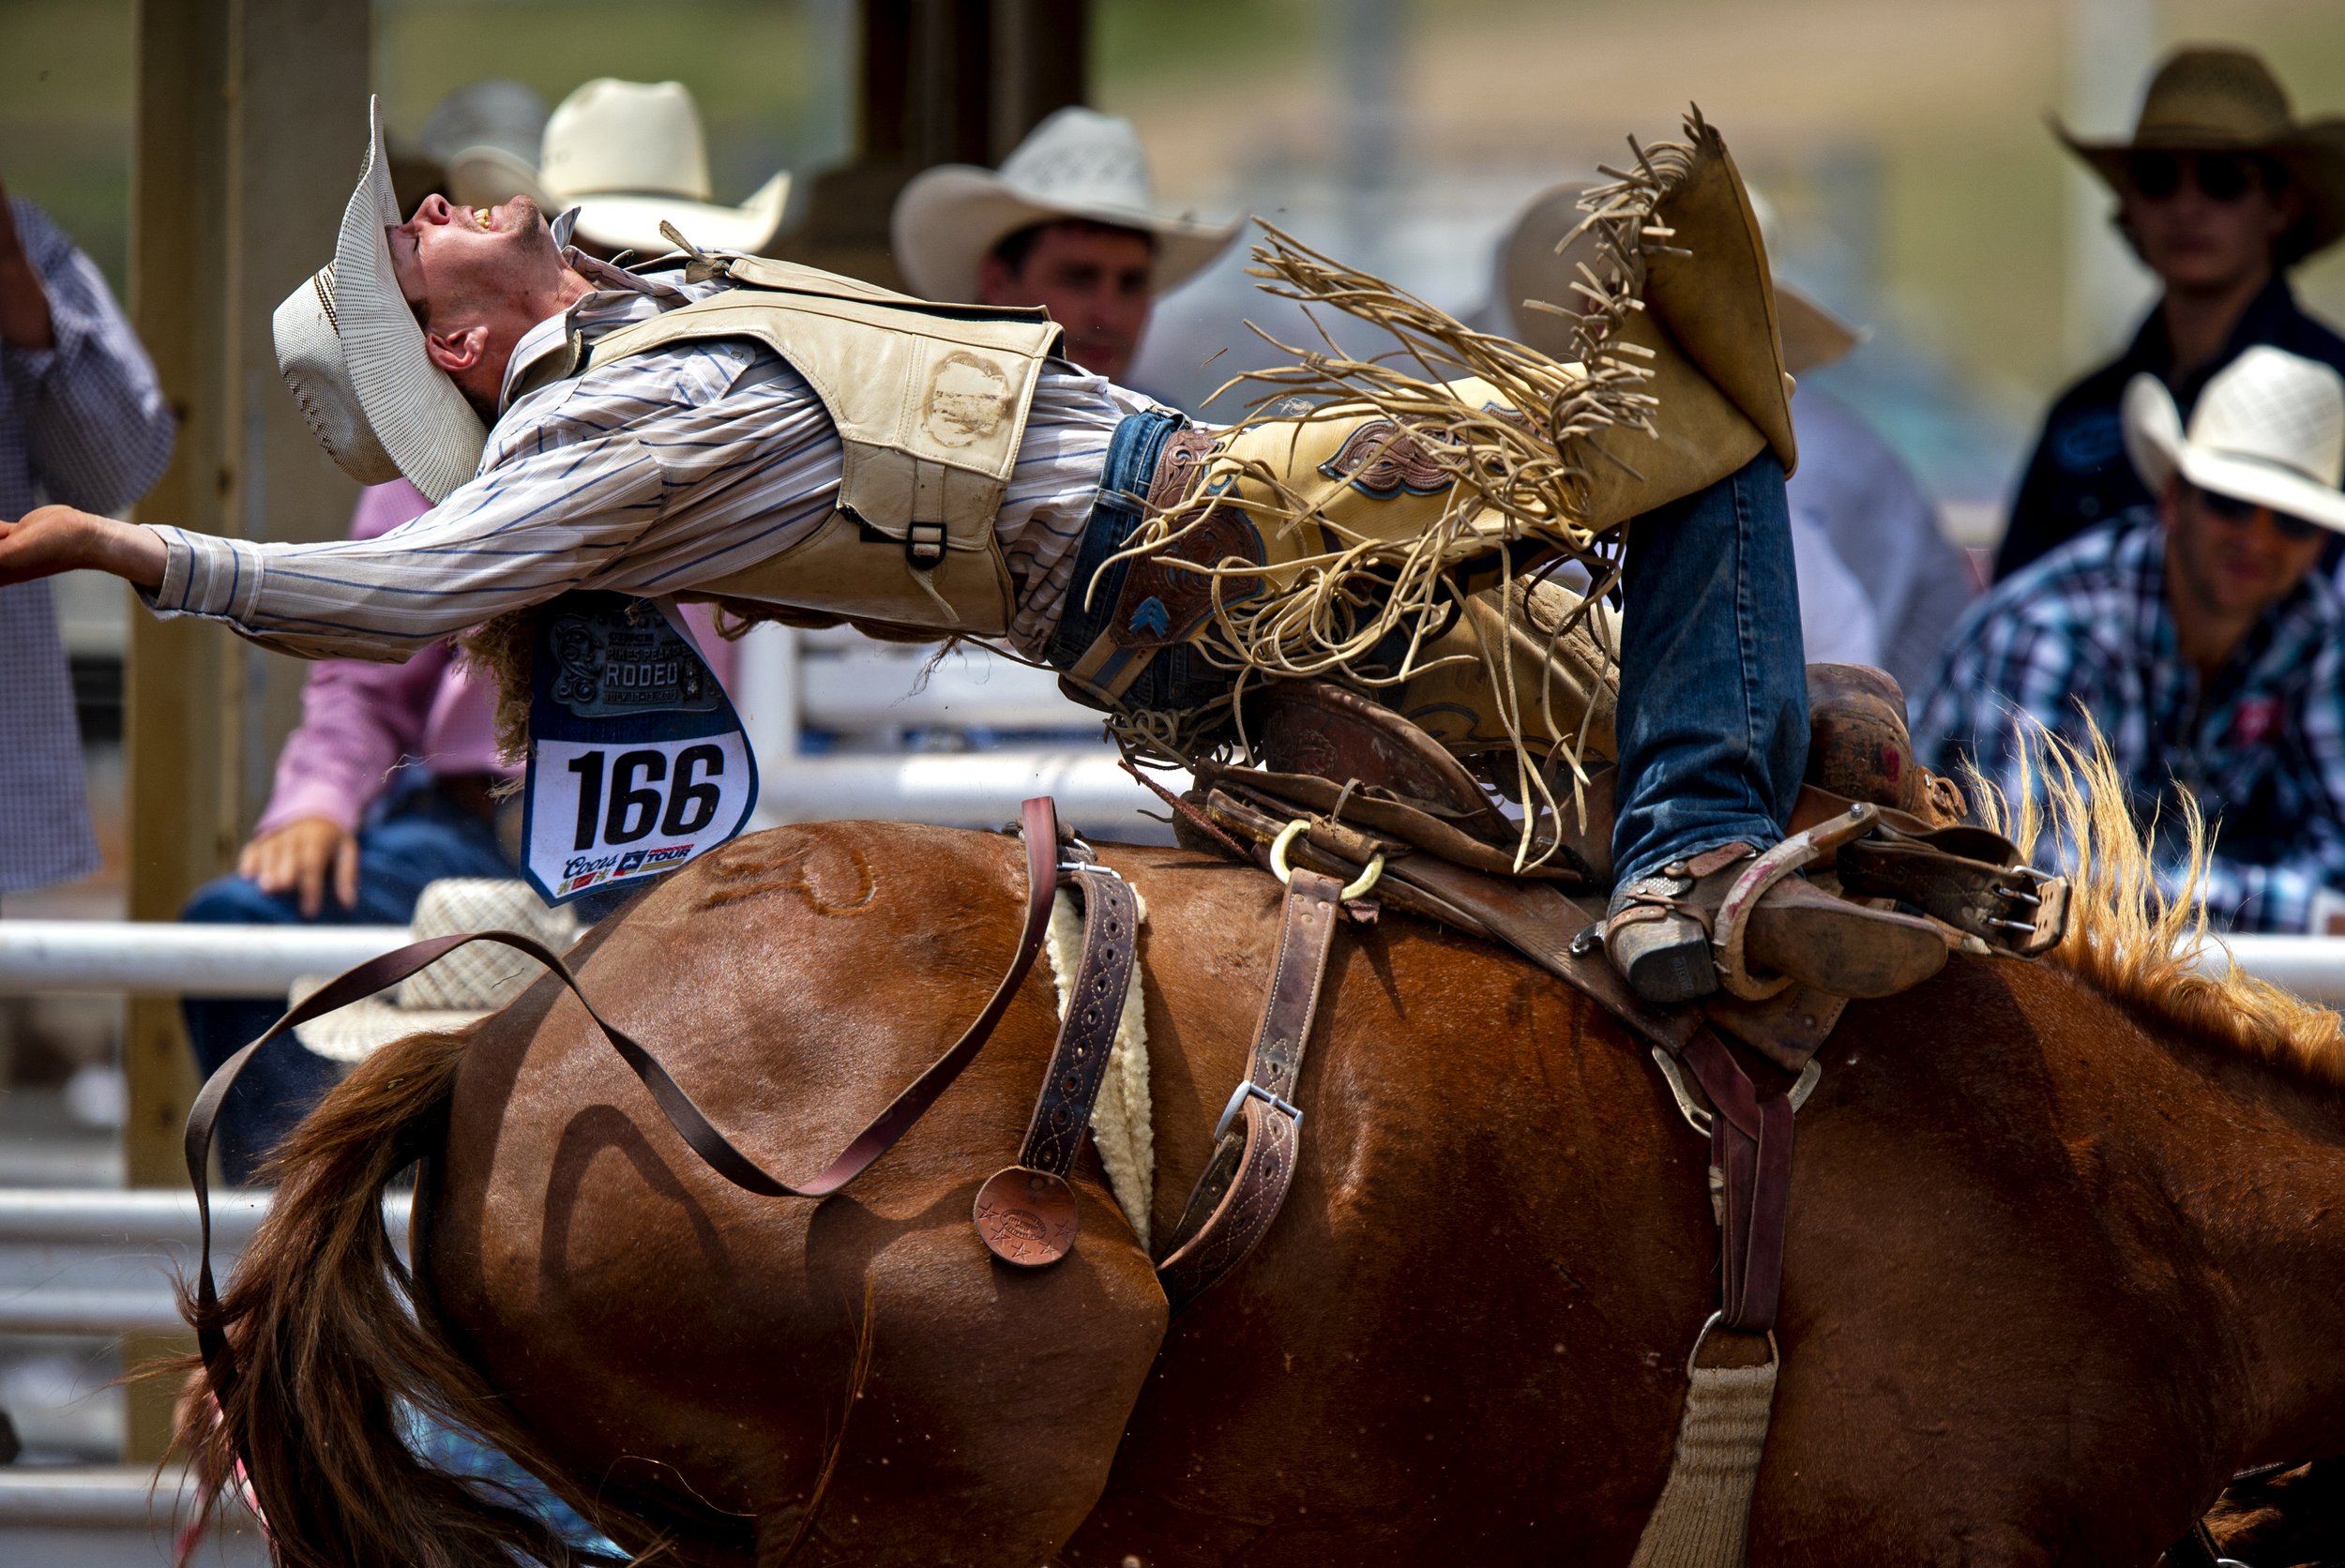  Sam Harper, of Paradise Valley, Nev., leans back on his horse during the saddle bronc competition July 13, 2019 at the Pikes Peak or Bust Rodeo at the Norris-Penrose Event Center in Colorado Springs, Colo. 